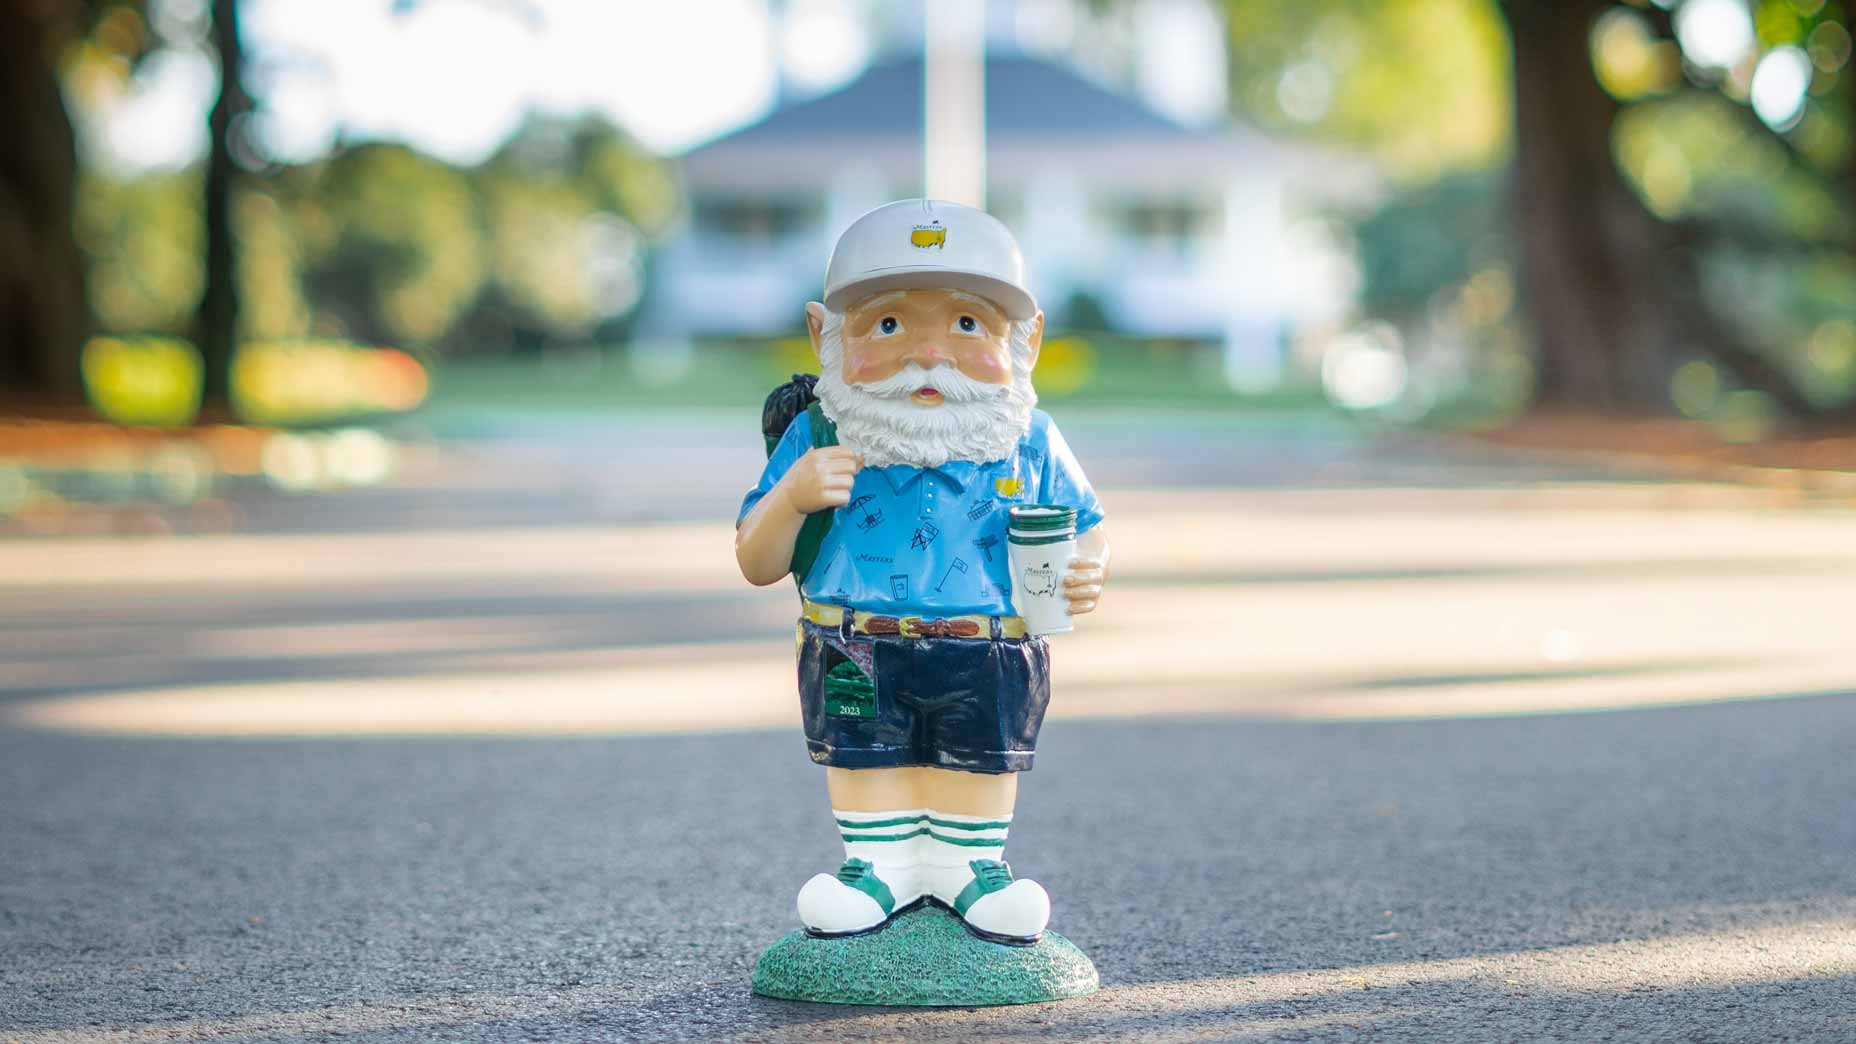 The most popular Masters merchandise item might surprise you